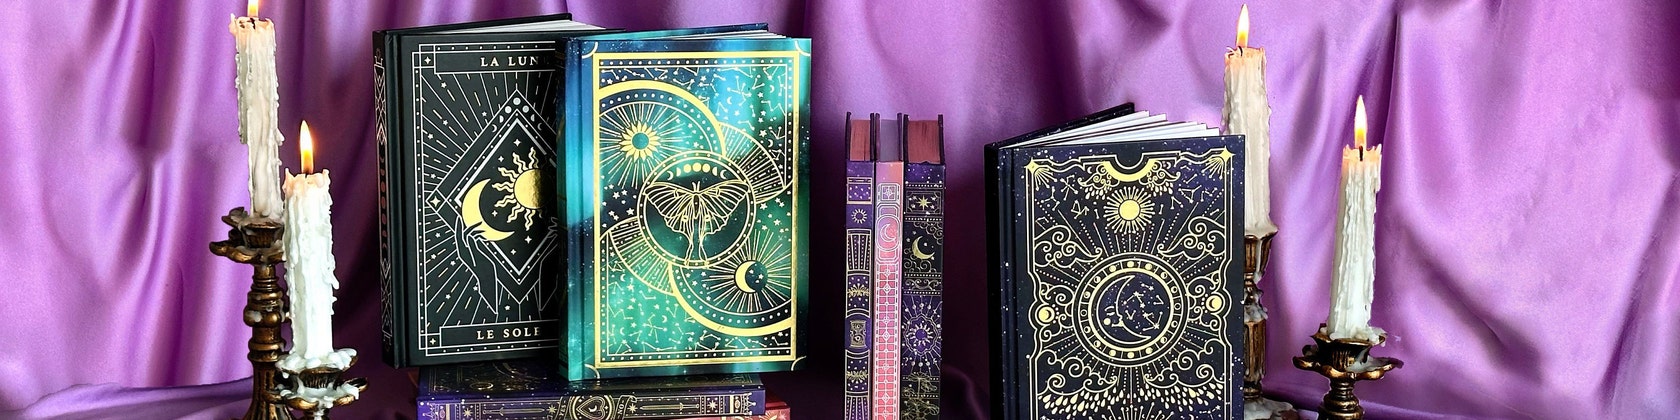 The Mystical Journaling Kit: Tools for Everyday Magic (RP Minis